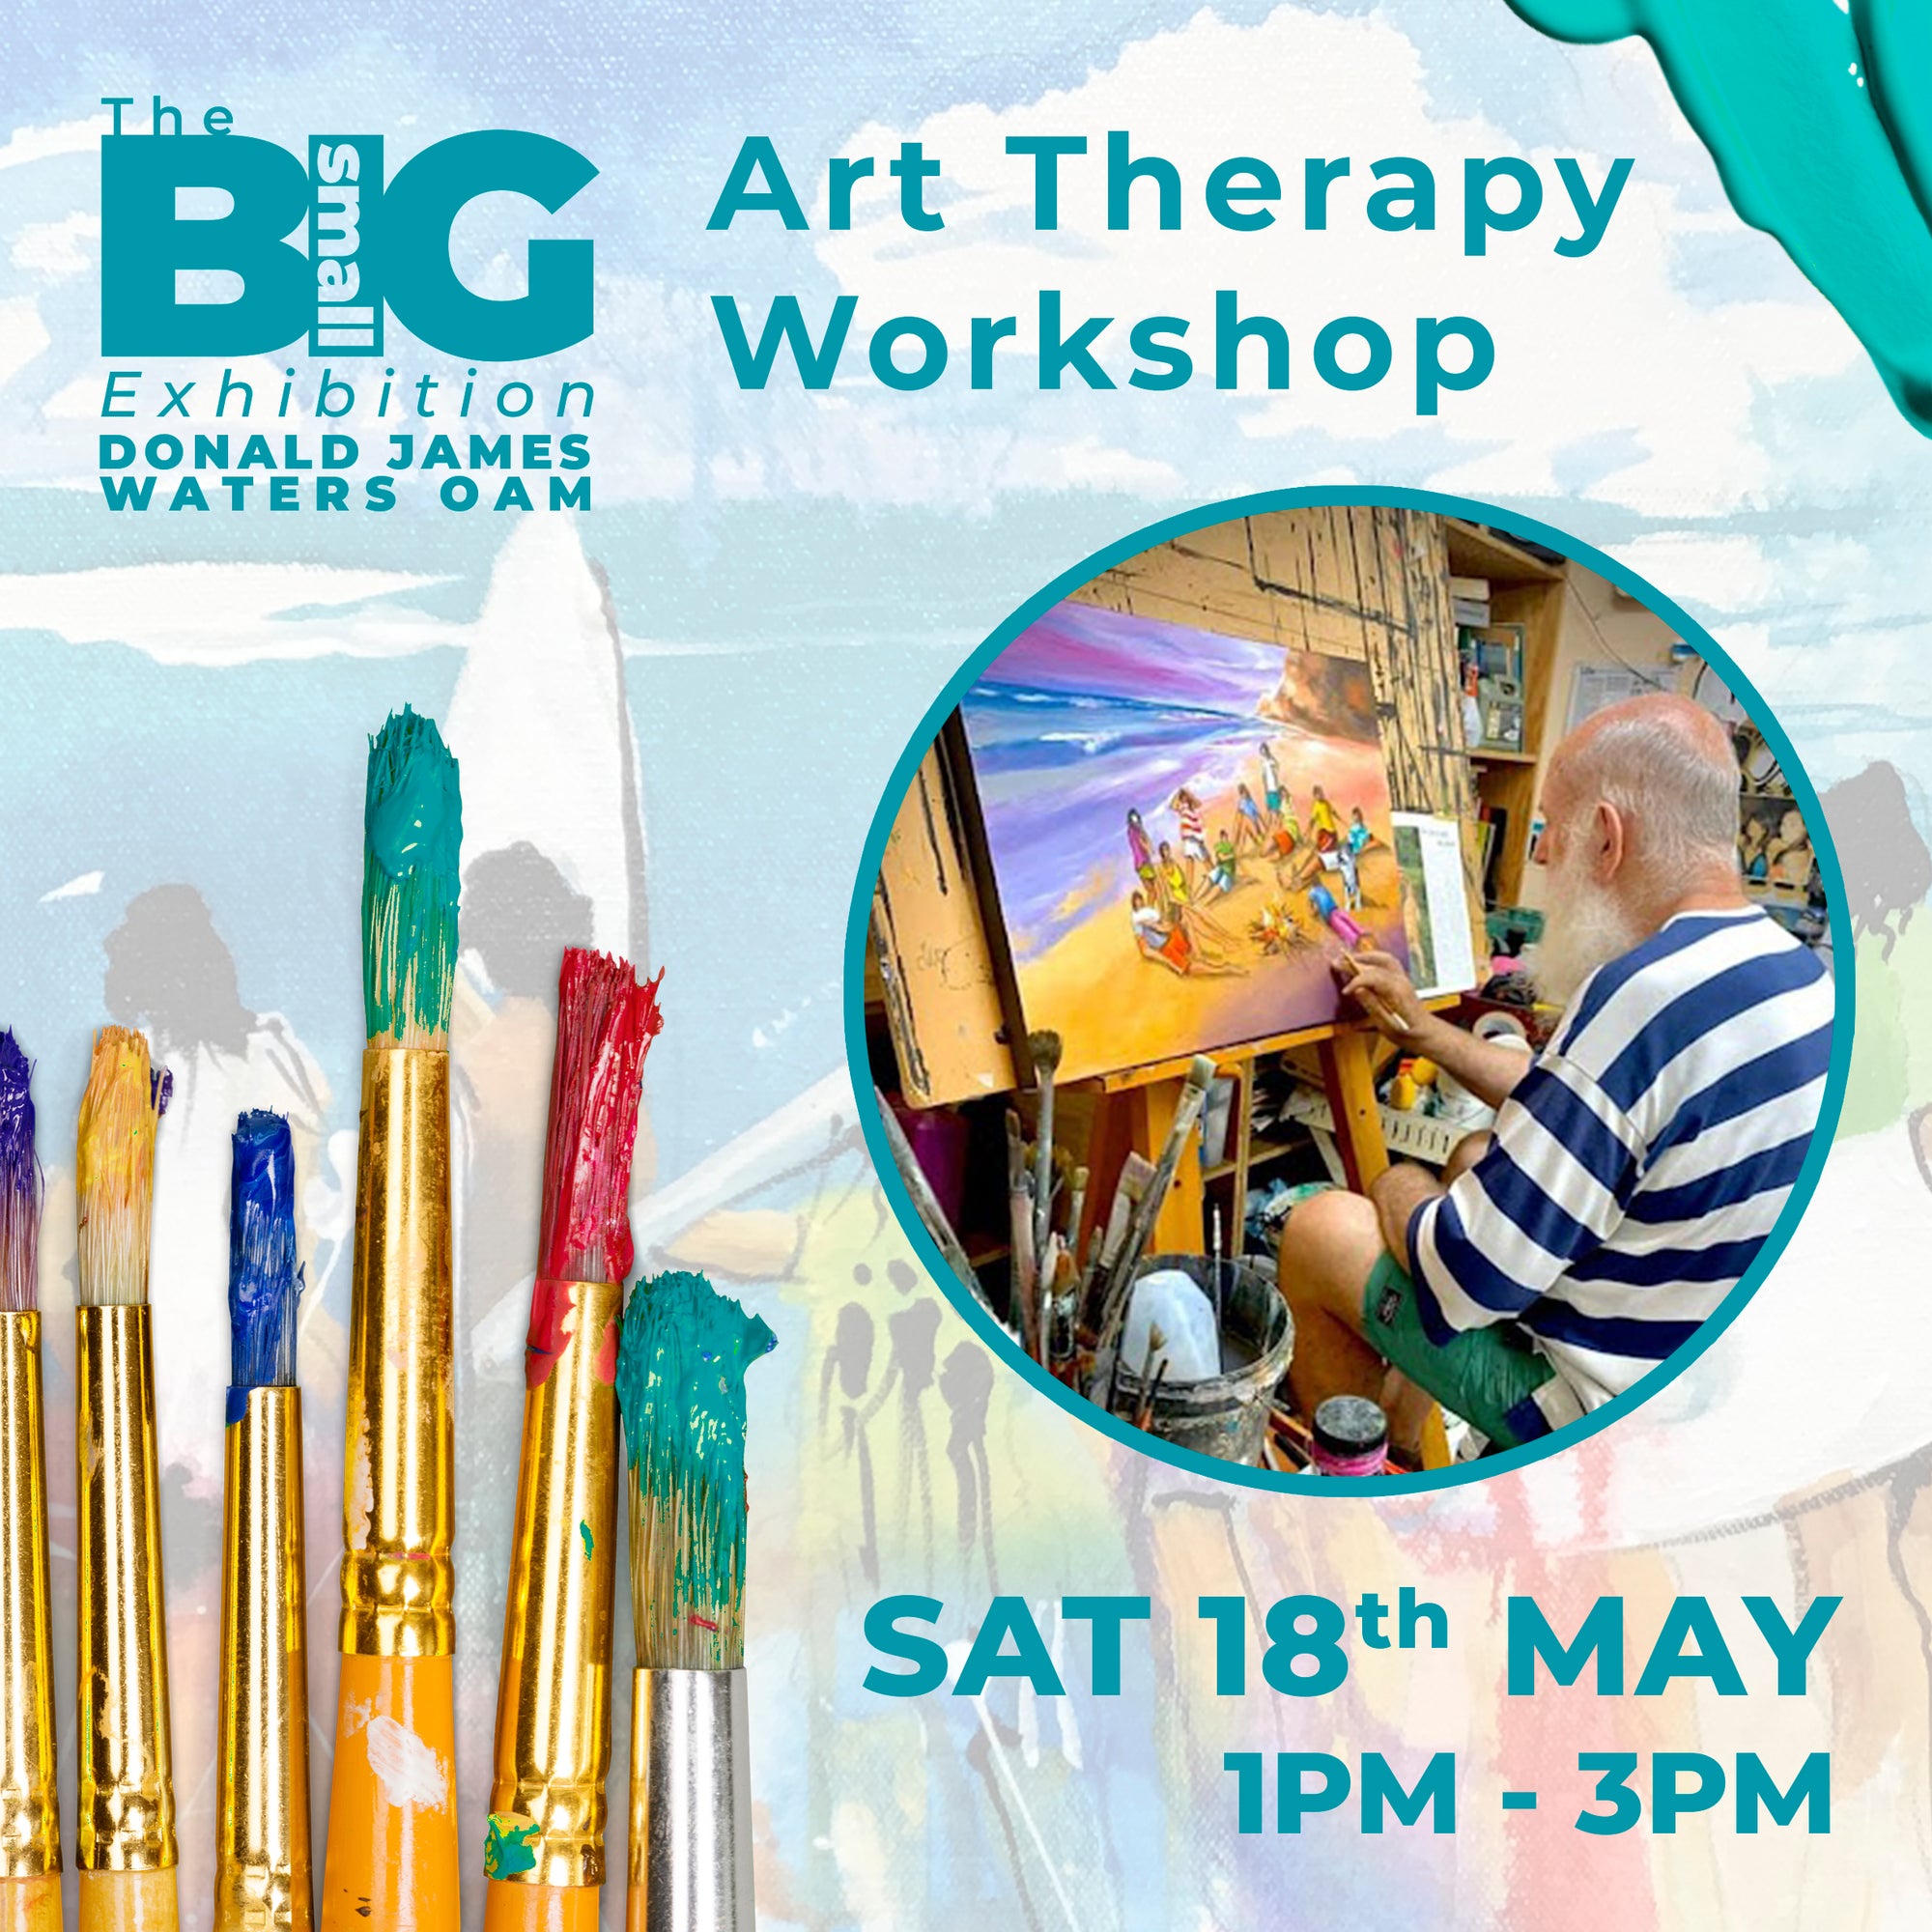 Self Discovery & Art Therapy Workshop with Donald James Waters OAM ‘THE BIG small EXHIBITION!"